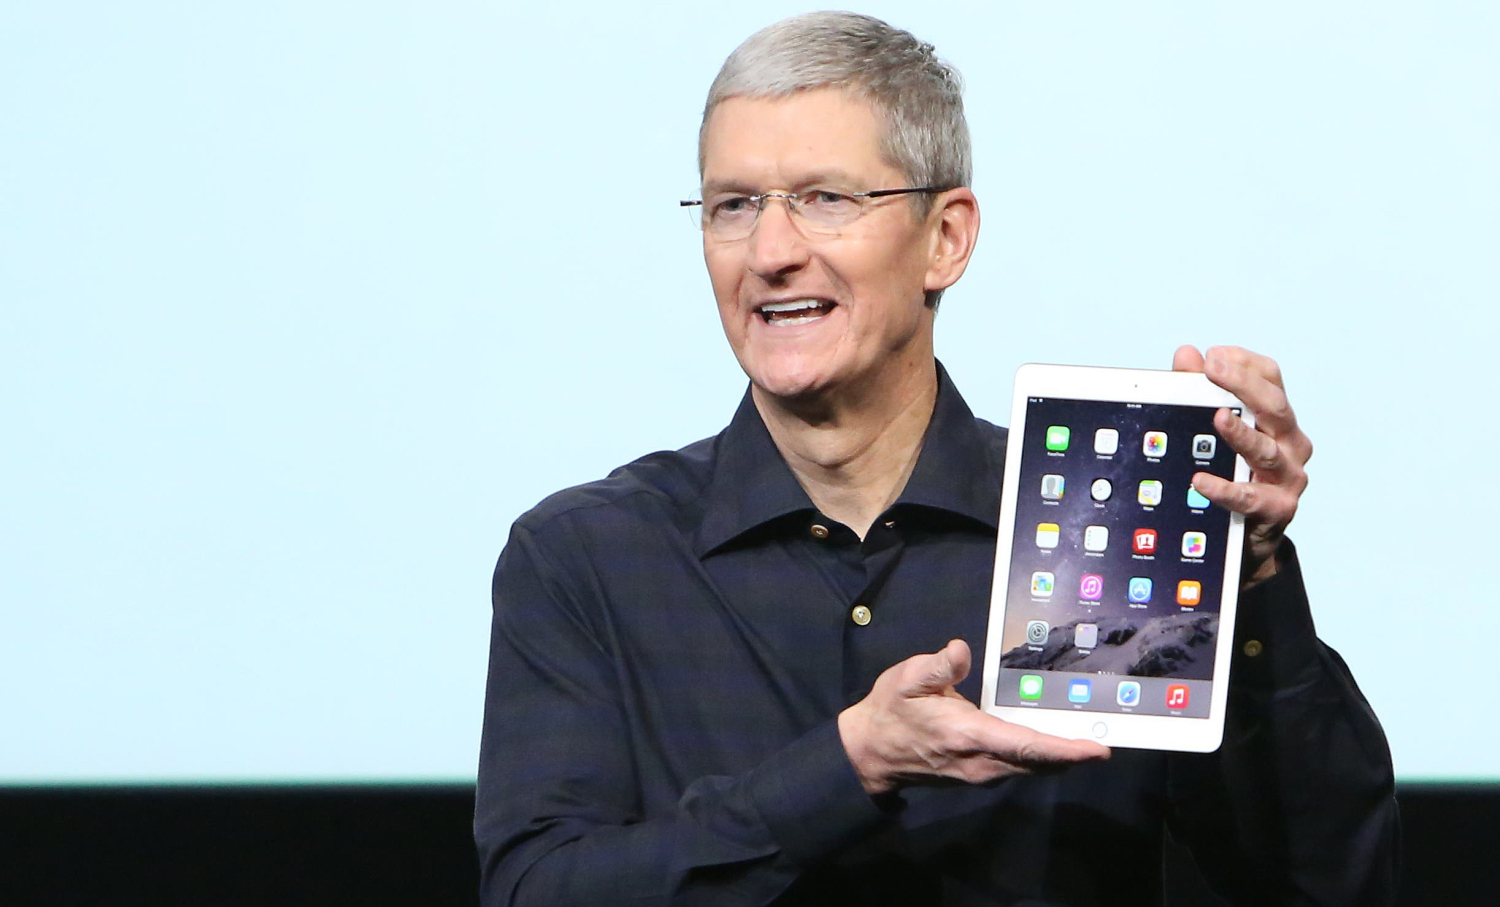 Apple CEO Tim Cook holds an iPad during a presentation at Apple headquarters in Cupertino, California October 16, 2014. REUTERS/Robert Galbraith (UNITED STATES - Tags: SCIENCE TECHNOLOGY BUSINESS) - RTR4AGWE